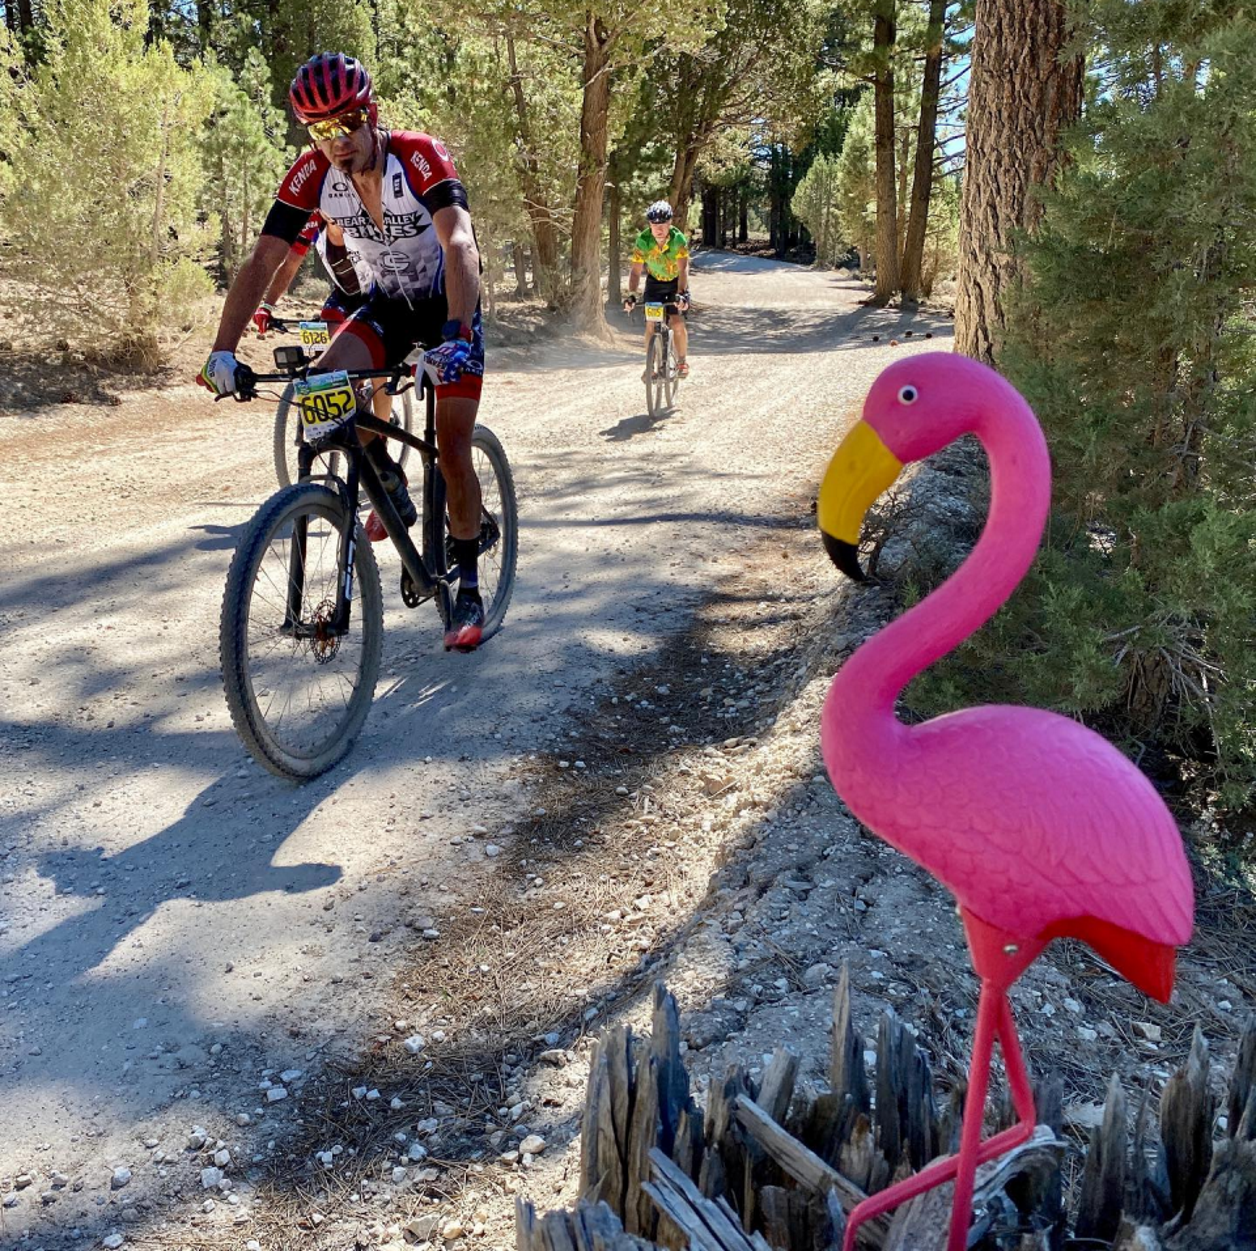 Photo: The 2021 Big Bear featured a NEW 50 mile Gravel Ride through the San Bernardino National Forest fire tracks and gravel roads.